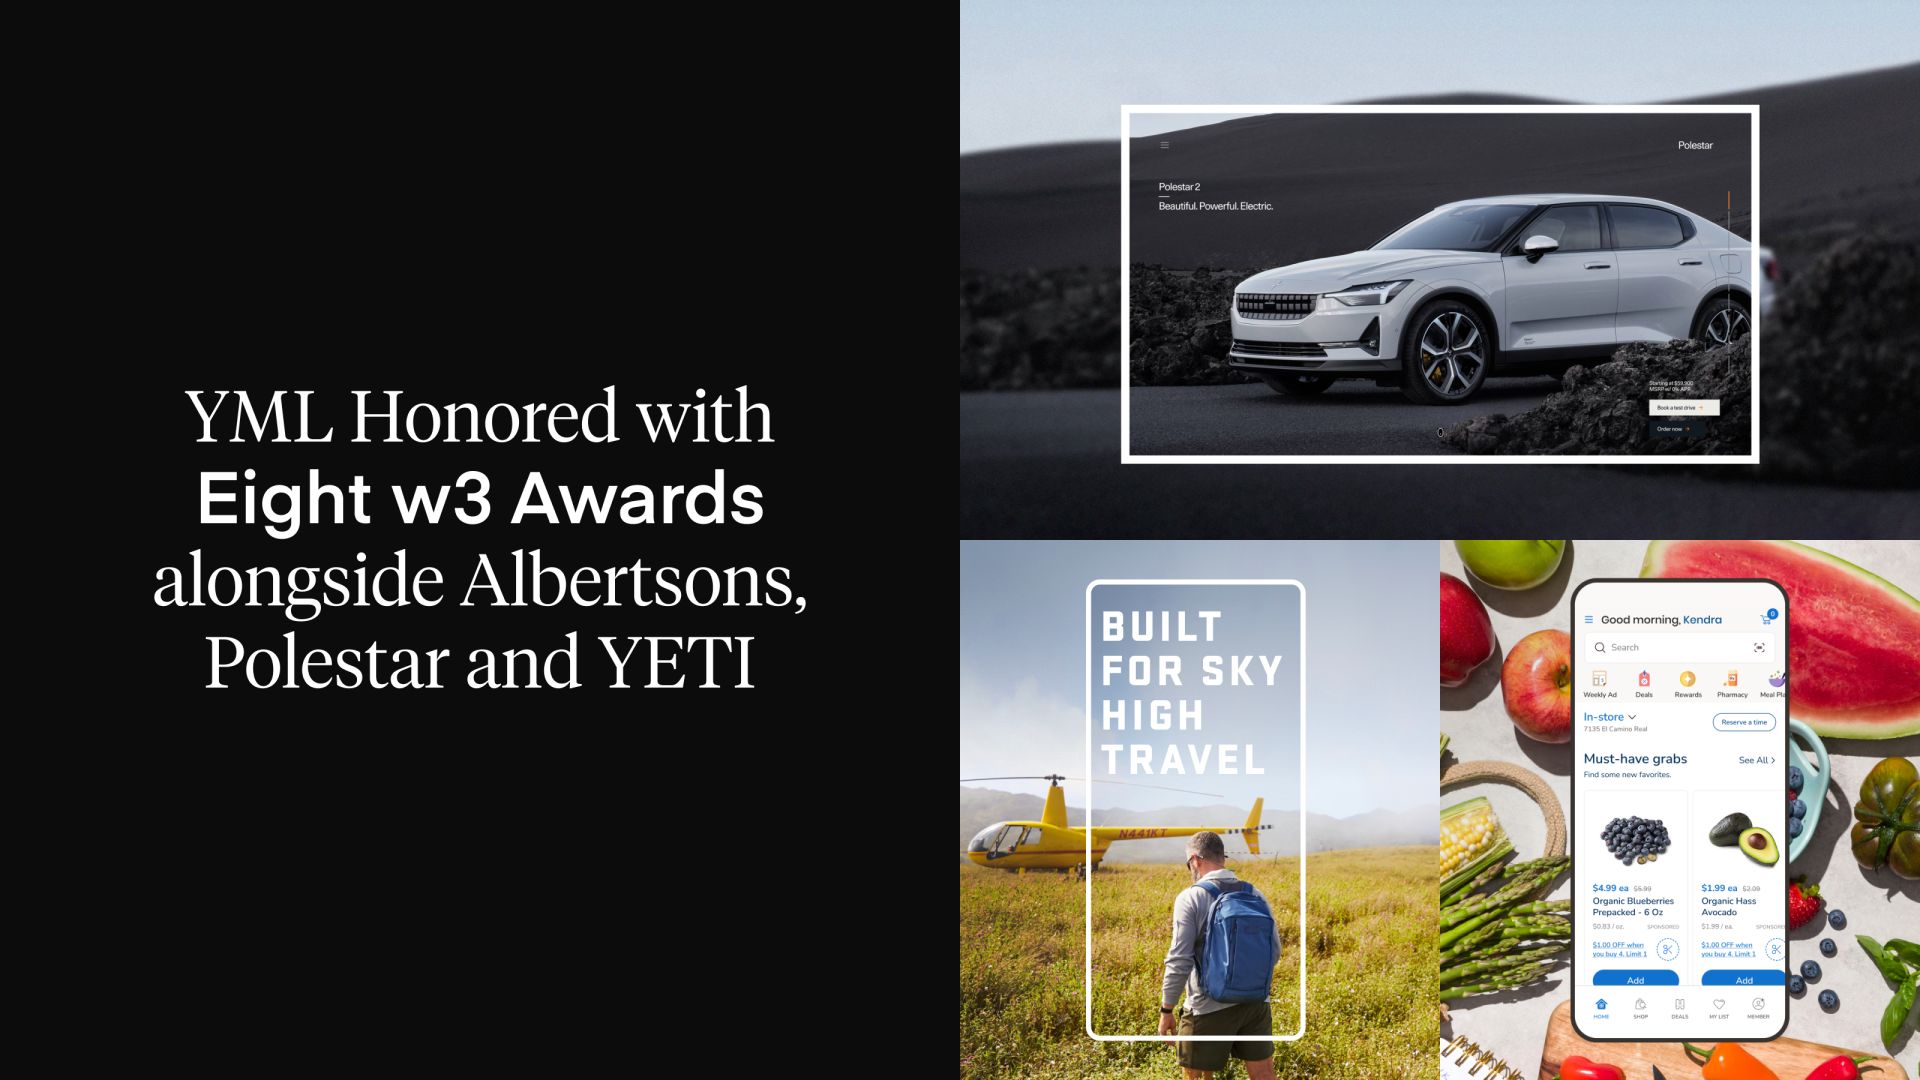 YML Honored with Eight w3 Awards for Work with Albertsons, Polestar and YETI